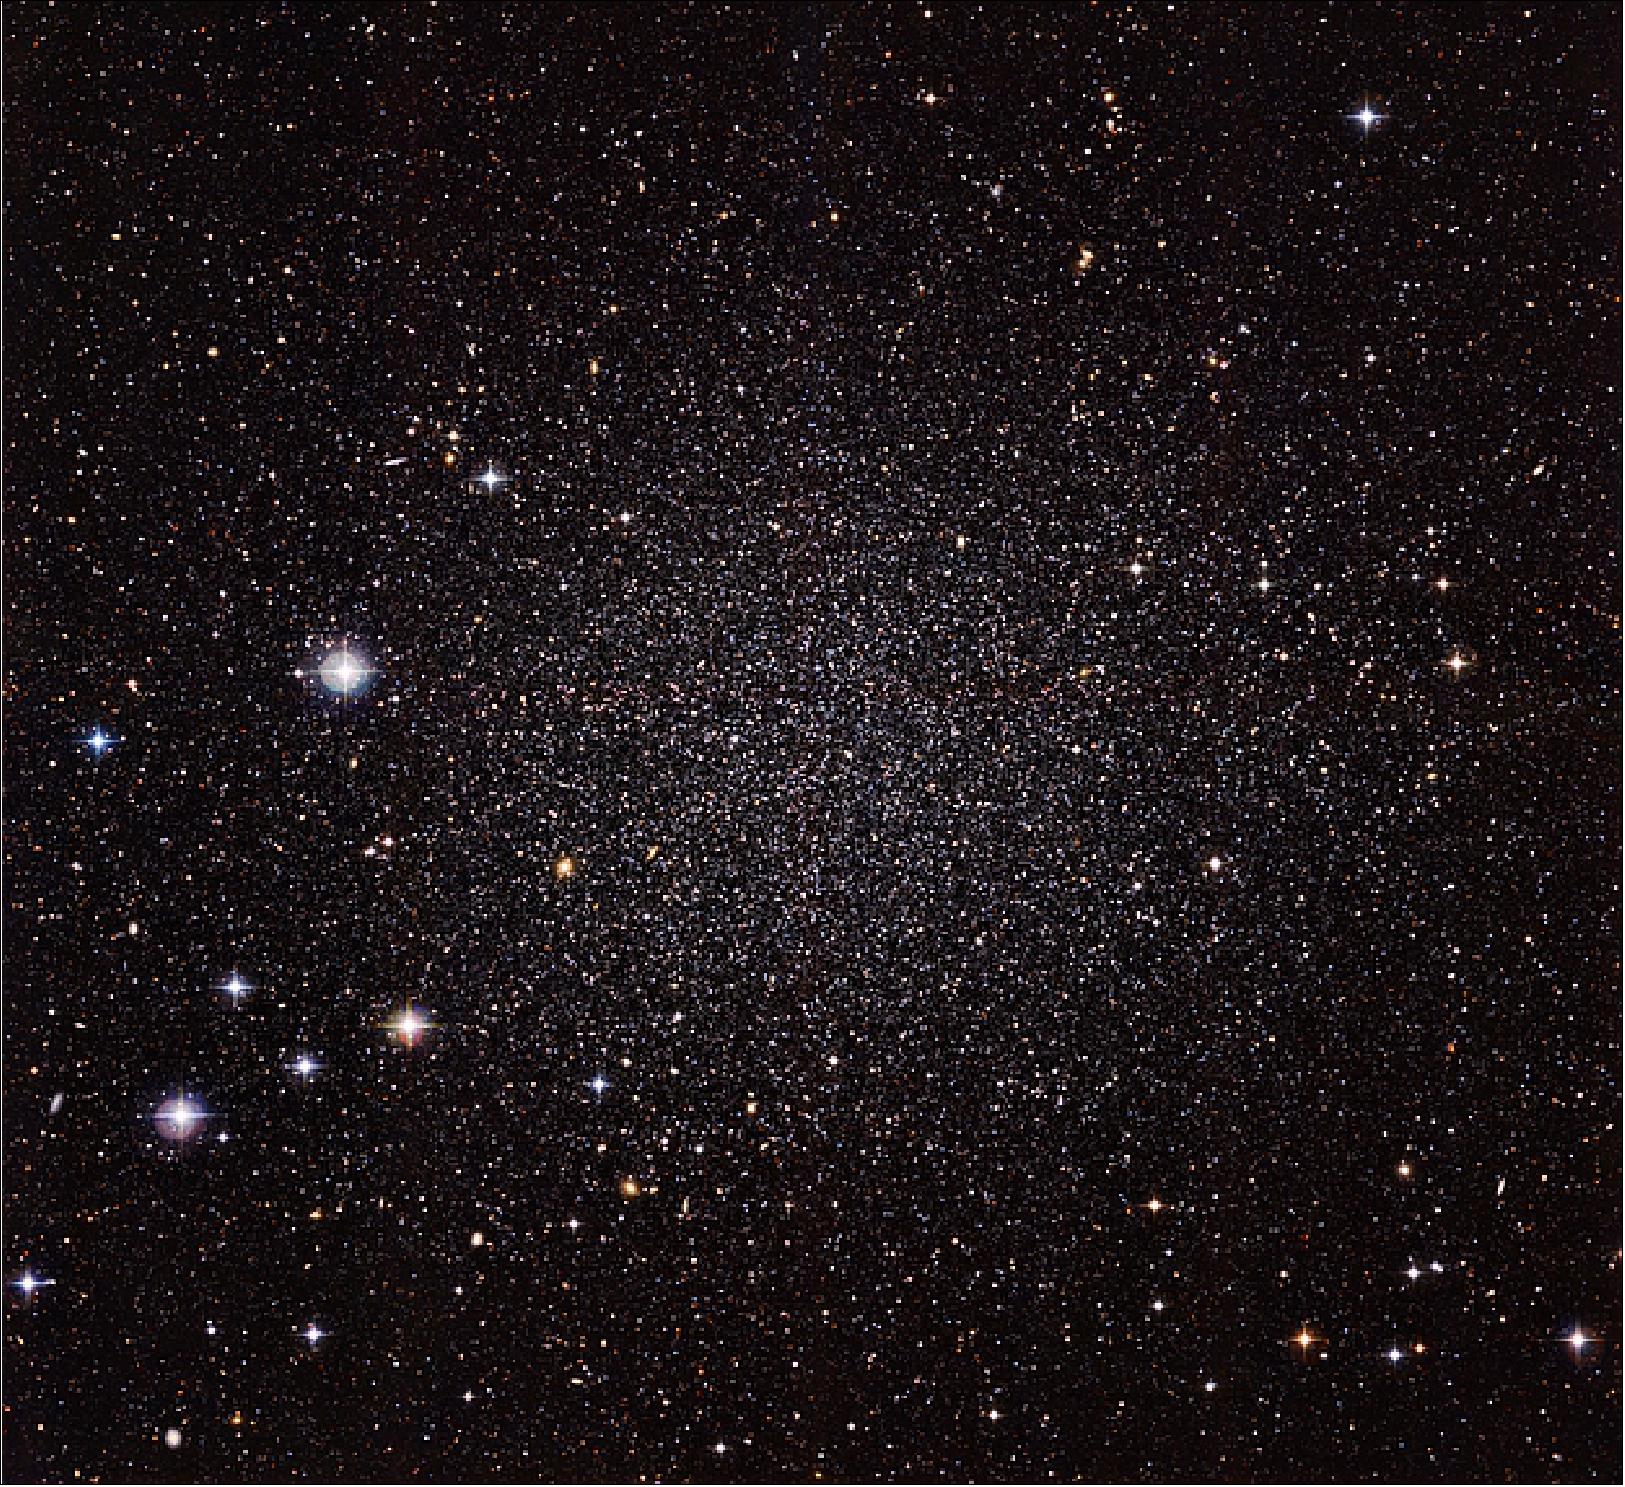 Figure 60: The Sculptor dwarf galaxy, a satellite of our Milky Way, imaged with the Wide Field Imager camera on the 2.2 m MPG/ESO telescope at ESO's La Silla Observatory in Chile (image credit: ESO)